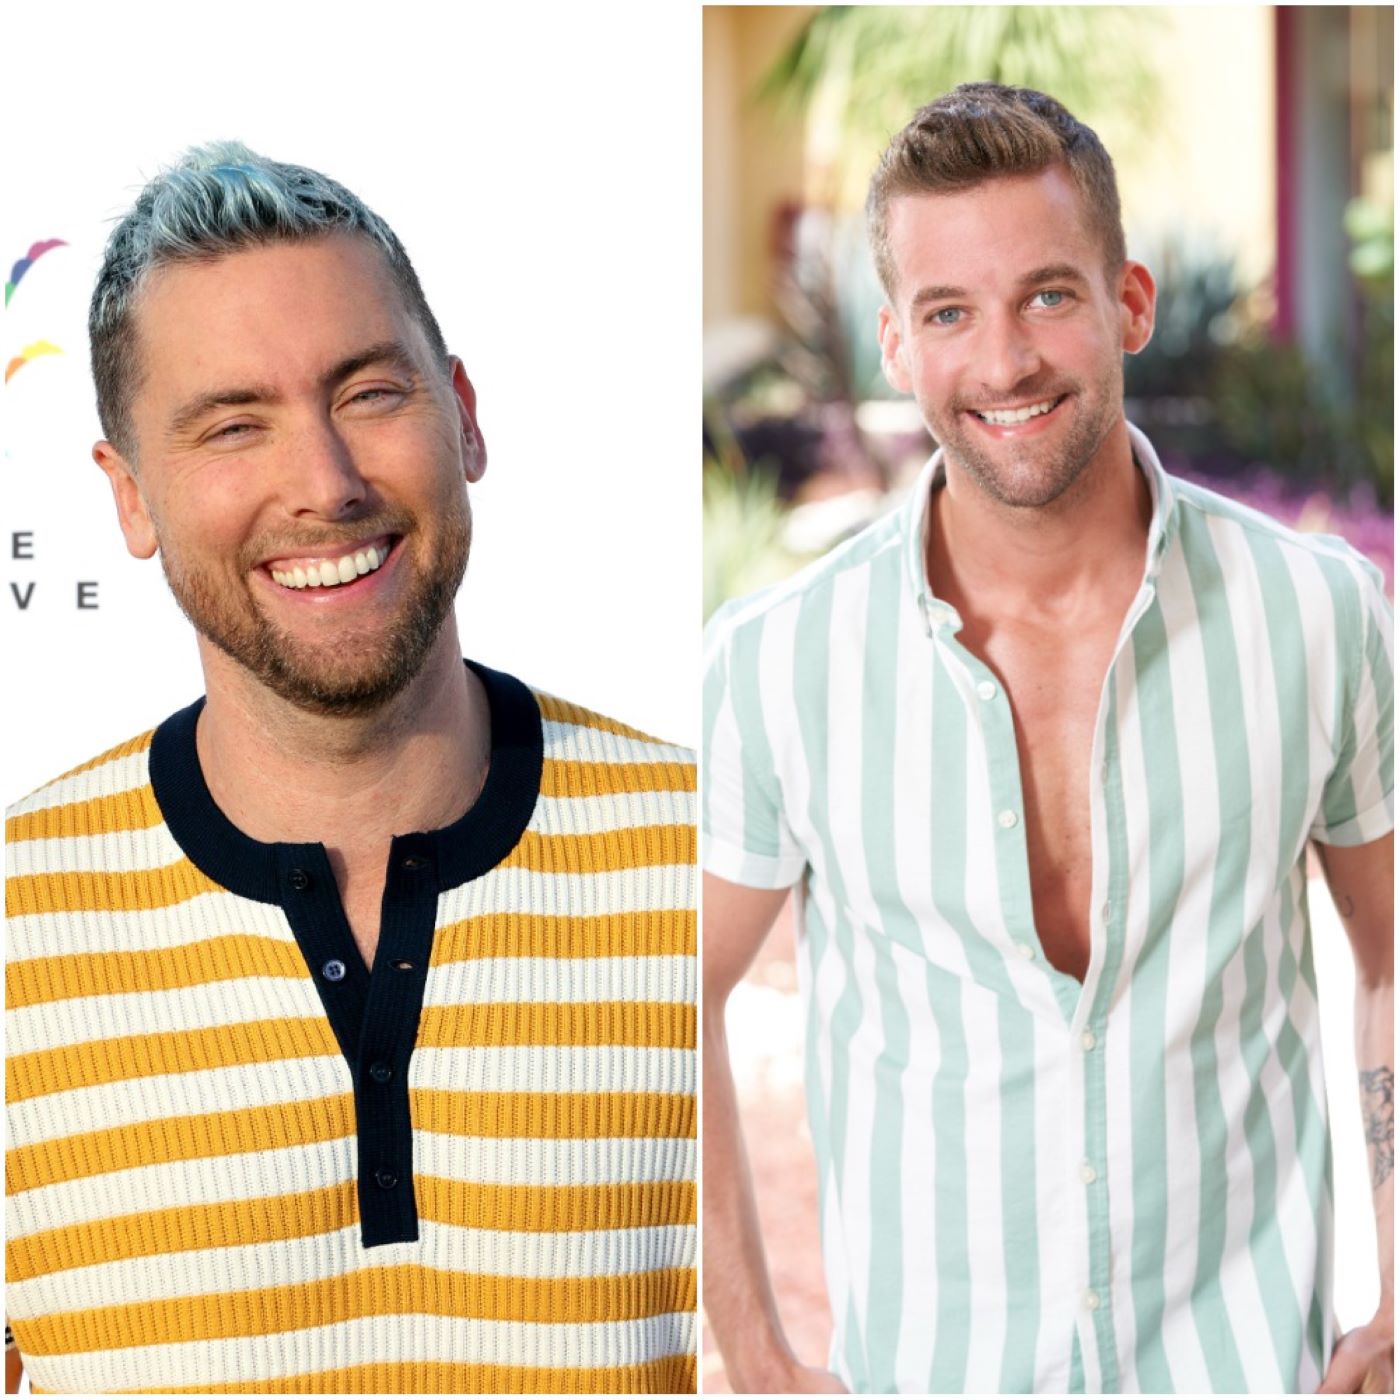 'Bachelor in Paradise' host Lance Bass in a yellow striped shirt and Connor Brennan